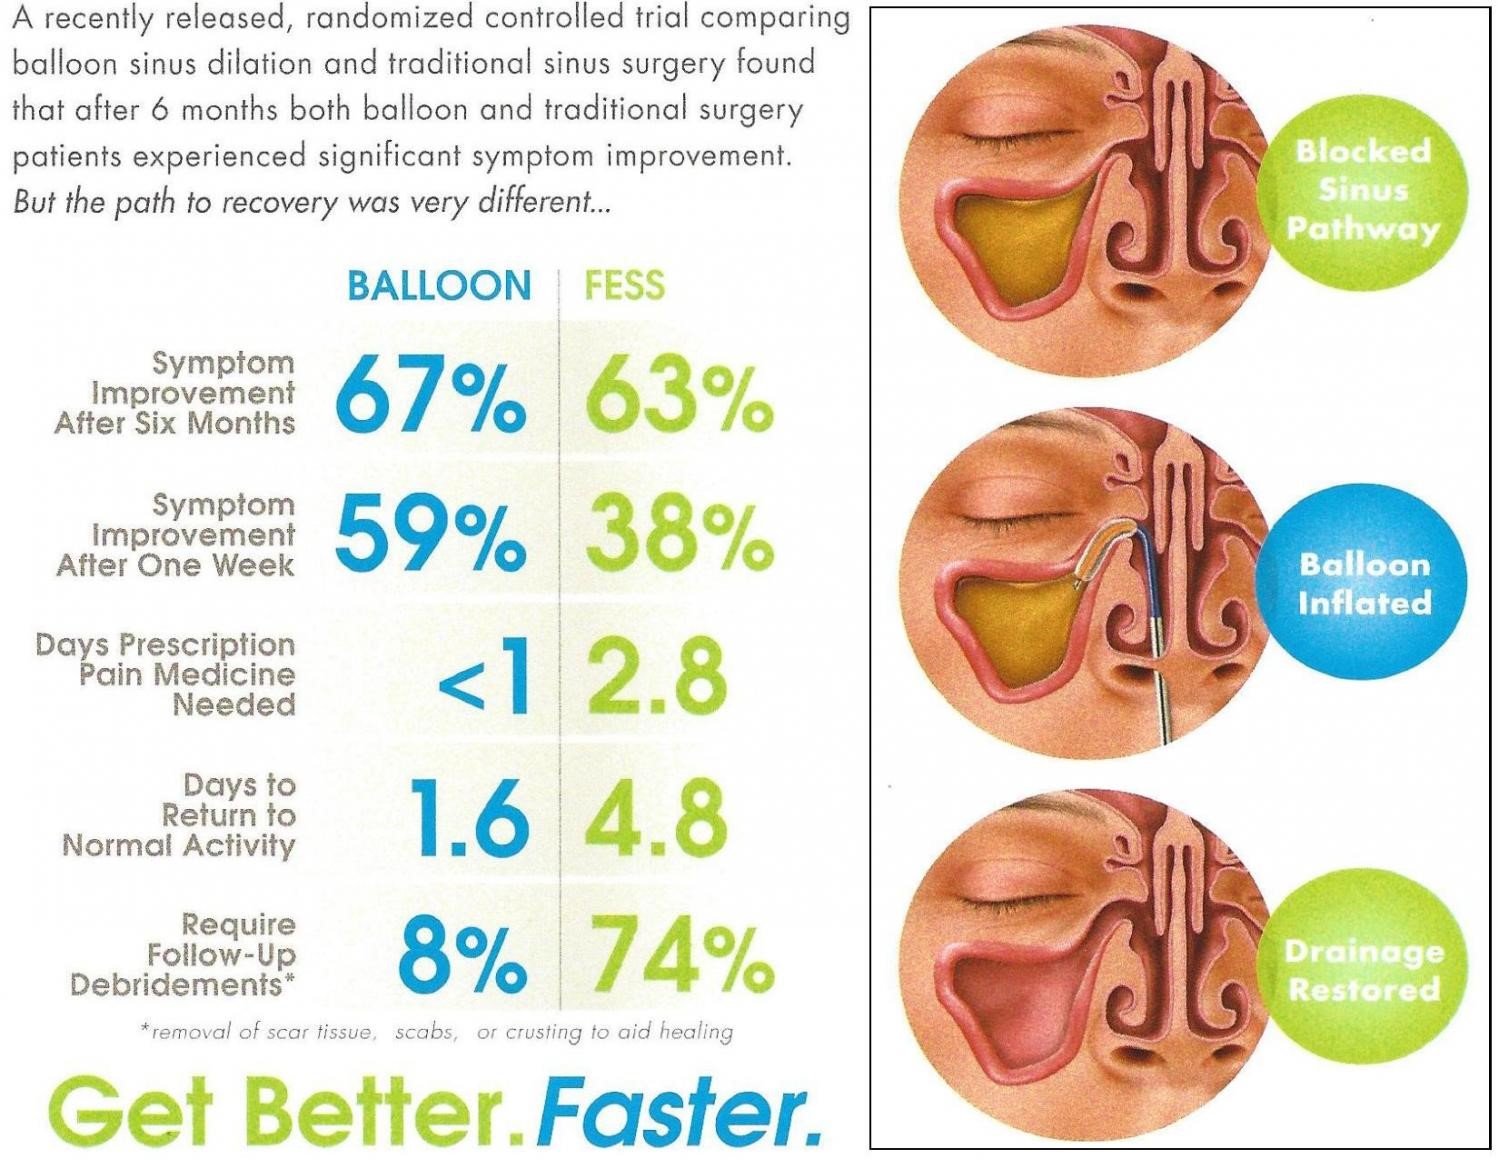 A graphic compares results between balloon sinus dilation and traditional sinus surgery for patients